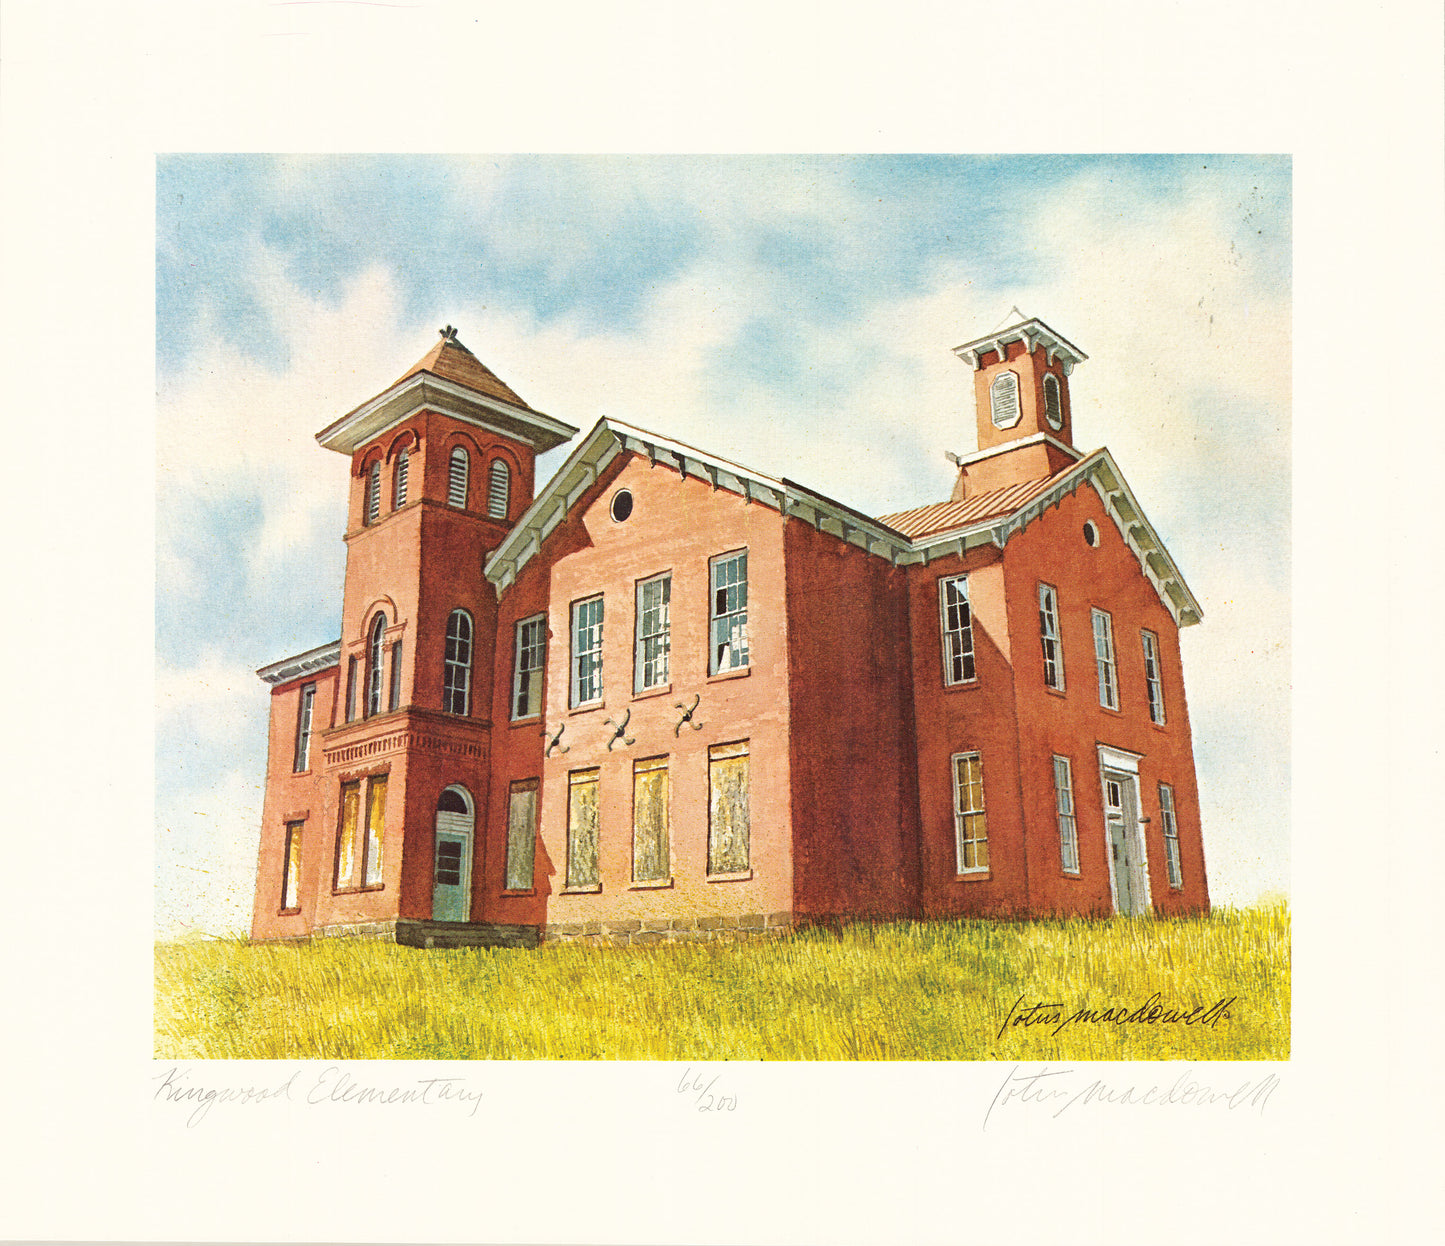 Kingwood Elementary, Preston Co., WV- Limited Edition Print, original watercolor painting by Lotus MacDowell, Artworks WV.  History and Architecture - now there's a match made in heaven. We have both, in this watercolor painting titled “Kingwood Elementary", but the name hides the true identity of this building. This architectural study of a civil war era building in Preston County, WV was used as a hospital during that war and later became a school.